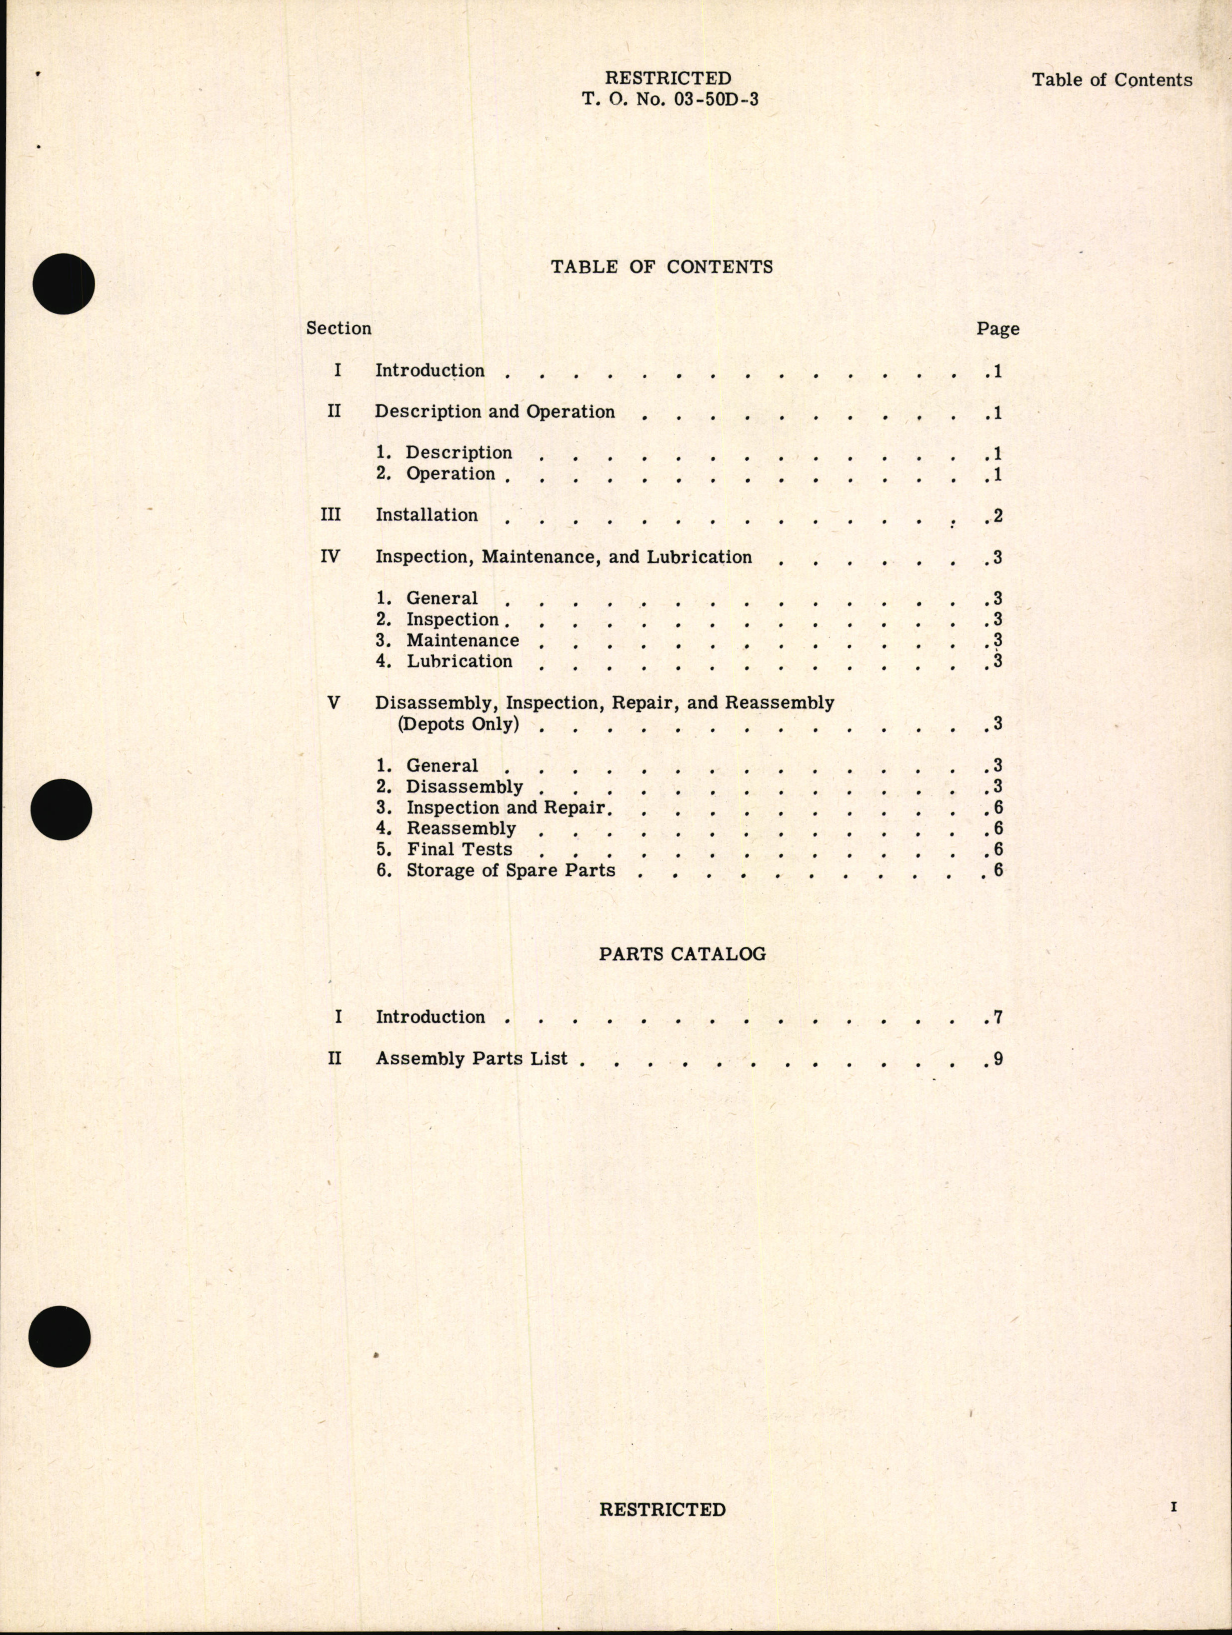 Sample page 5 from AirCorps Library document: Handbook of Instructions with Parts Catalog for Oxygen Flow Indicators MK-II and MK-III